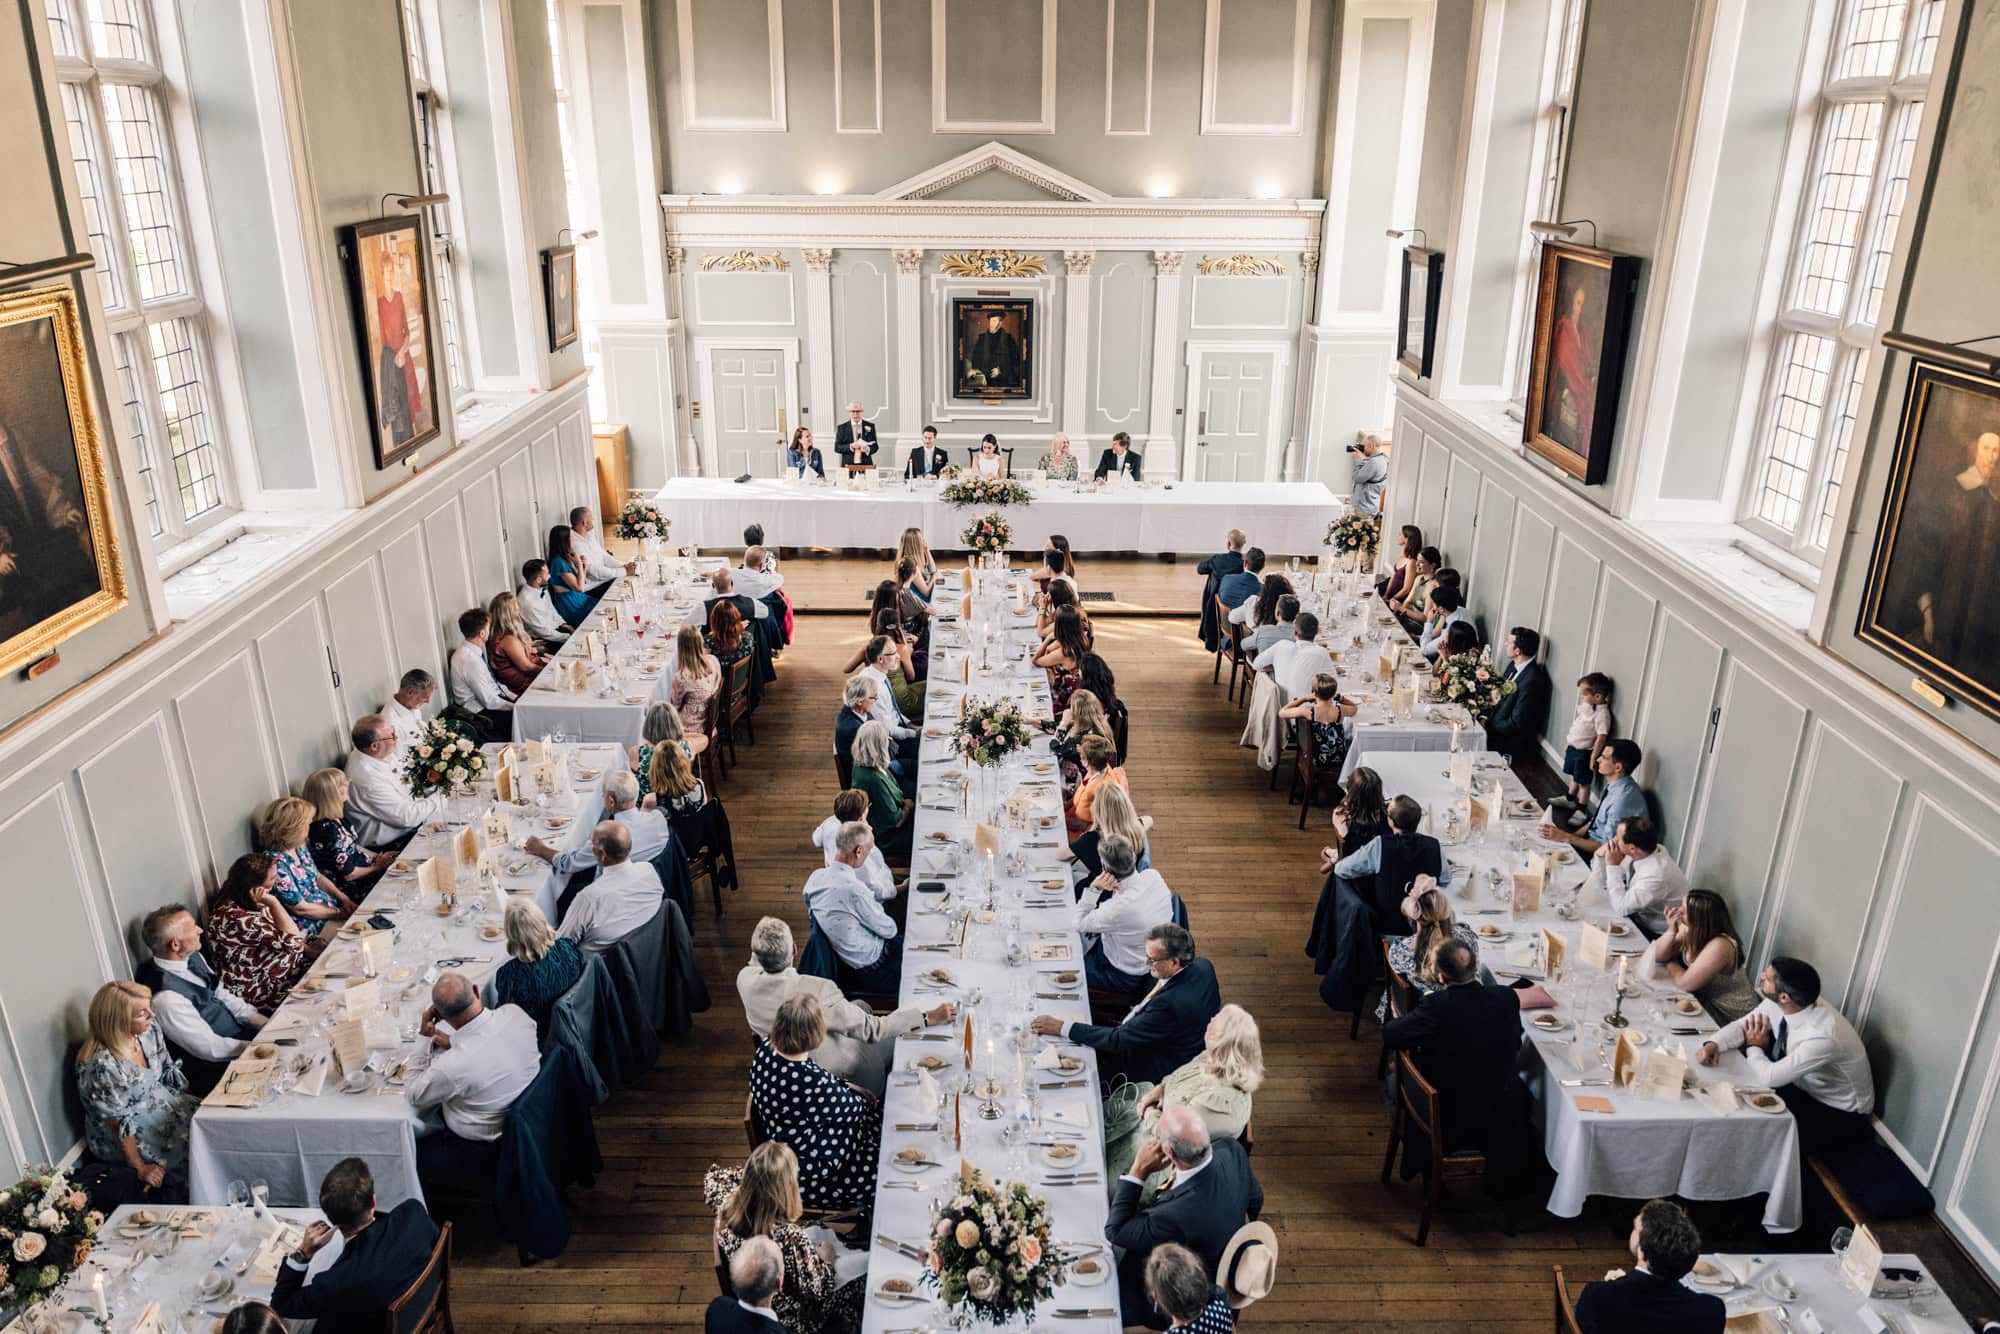 An overhead view of the grand dining hall at Emmanuel Collge during a Wedding